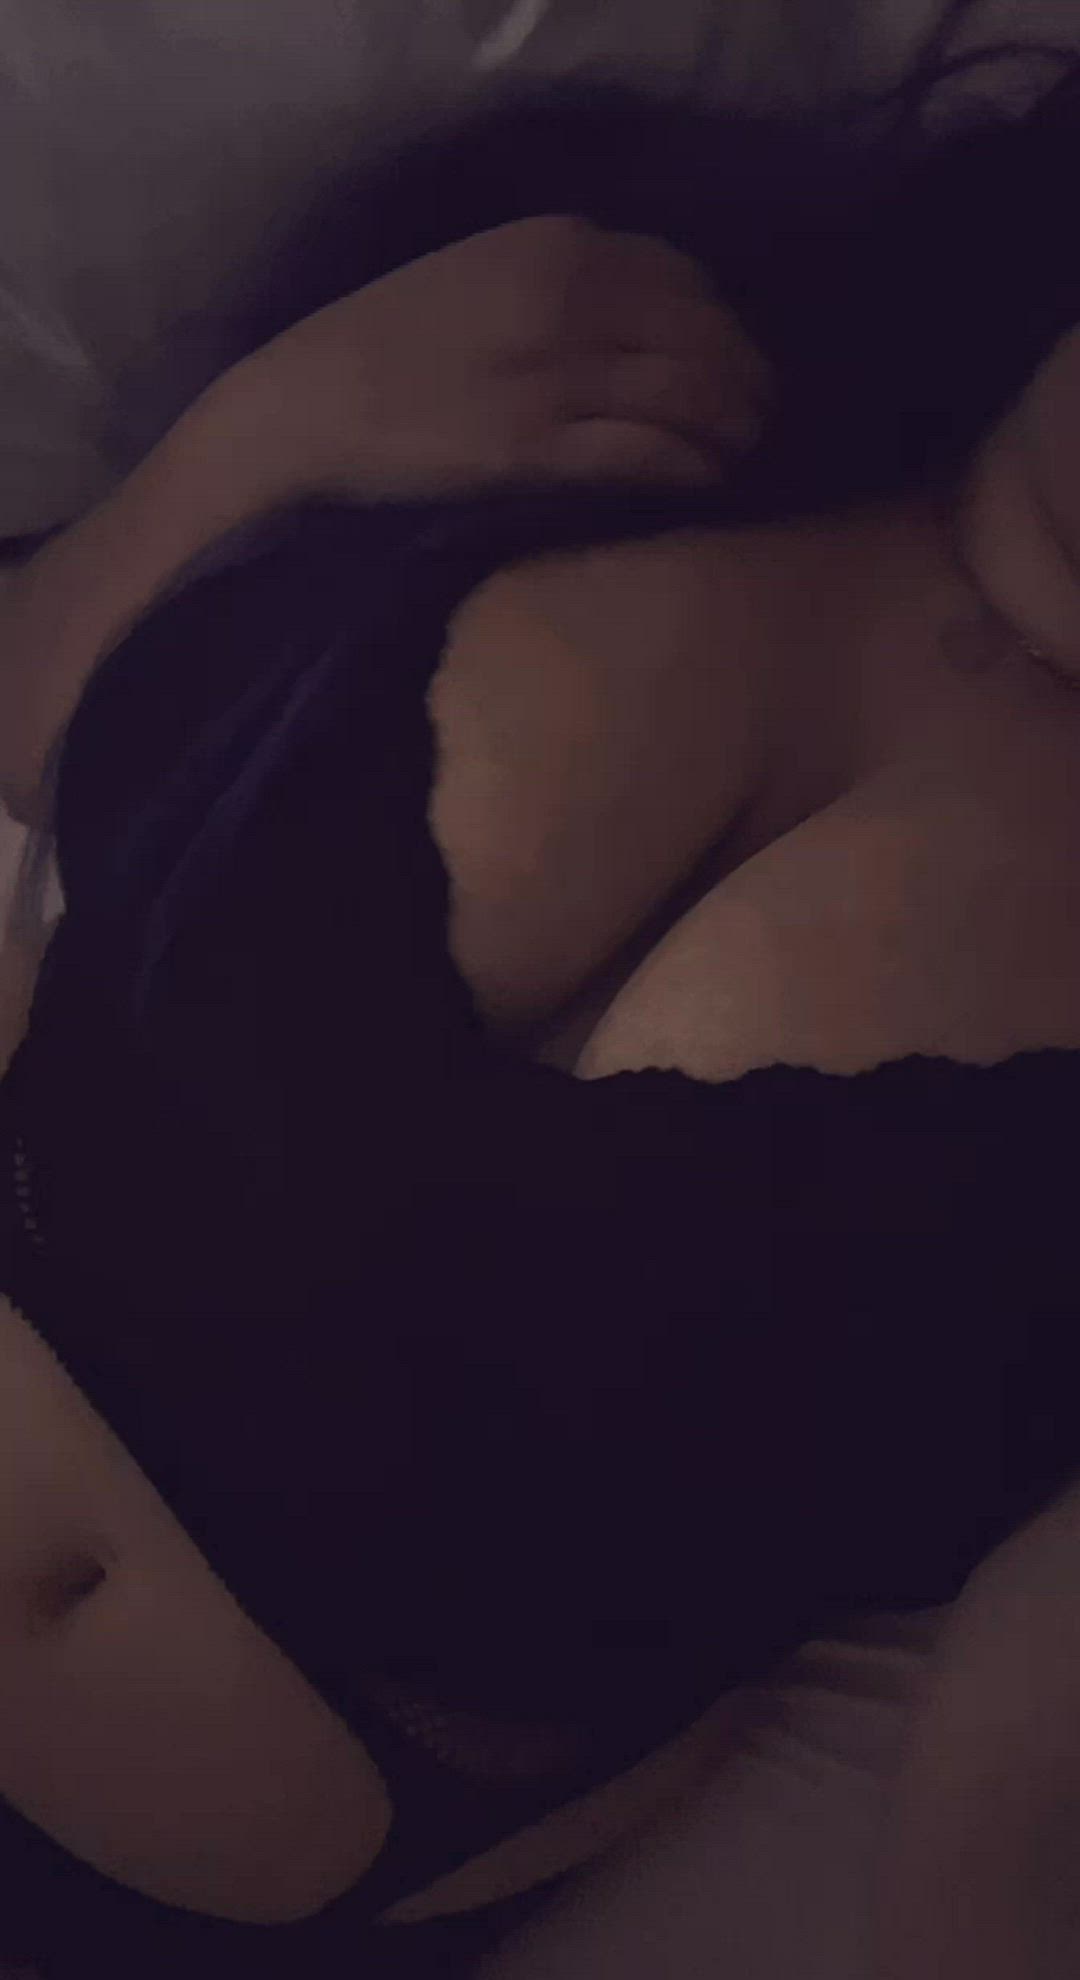 Big Tits porn video with onlyfans model btbvxo <strong>@btbxo</strong>